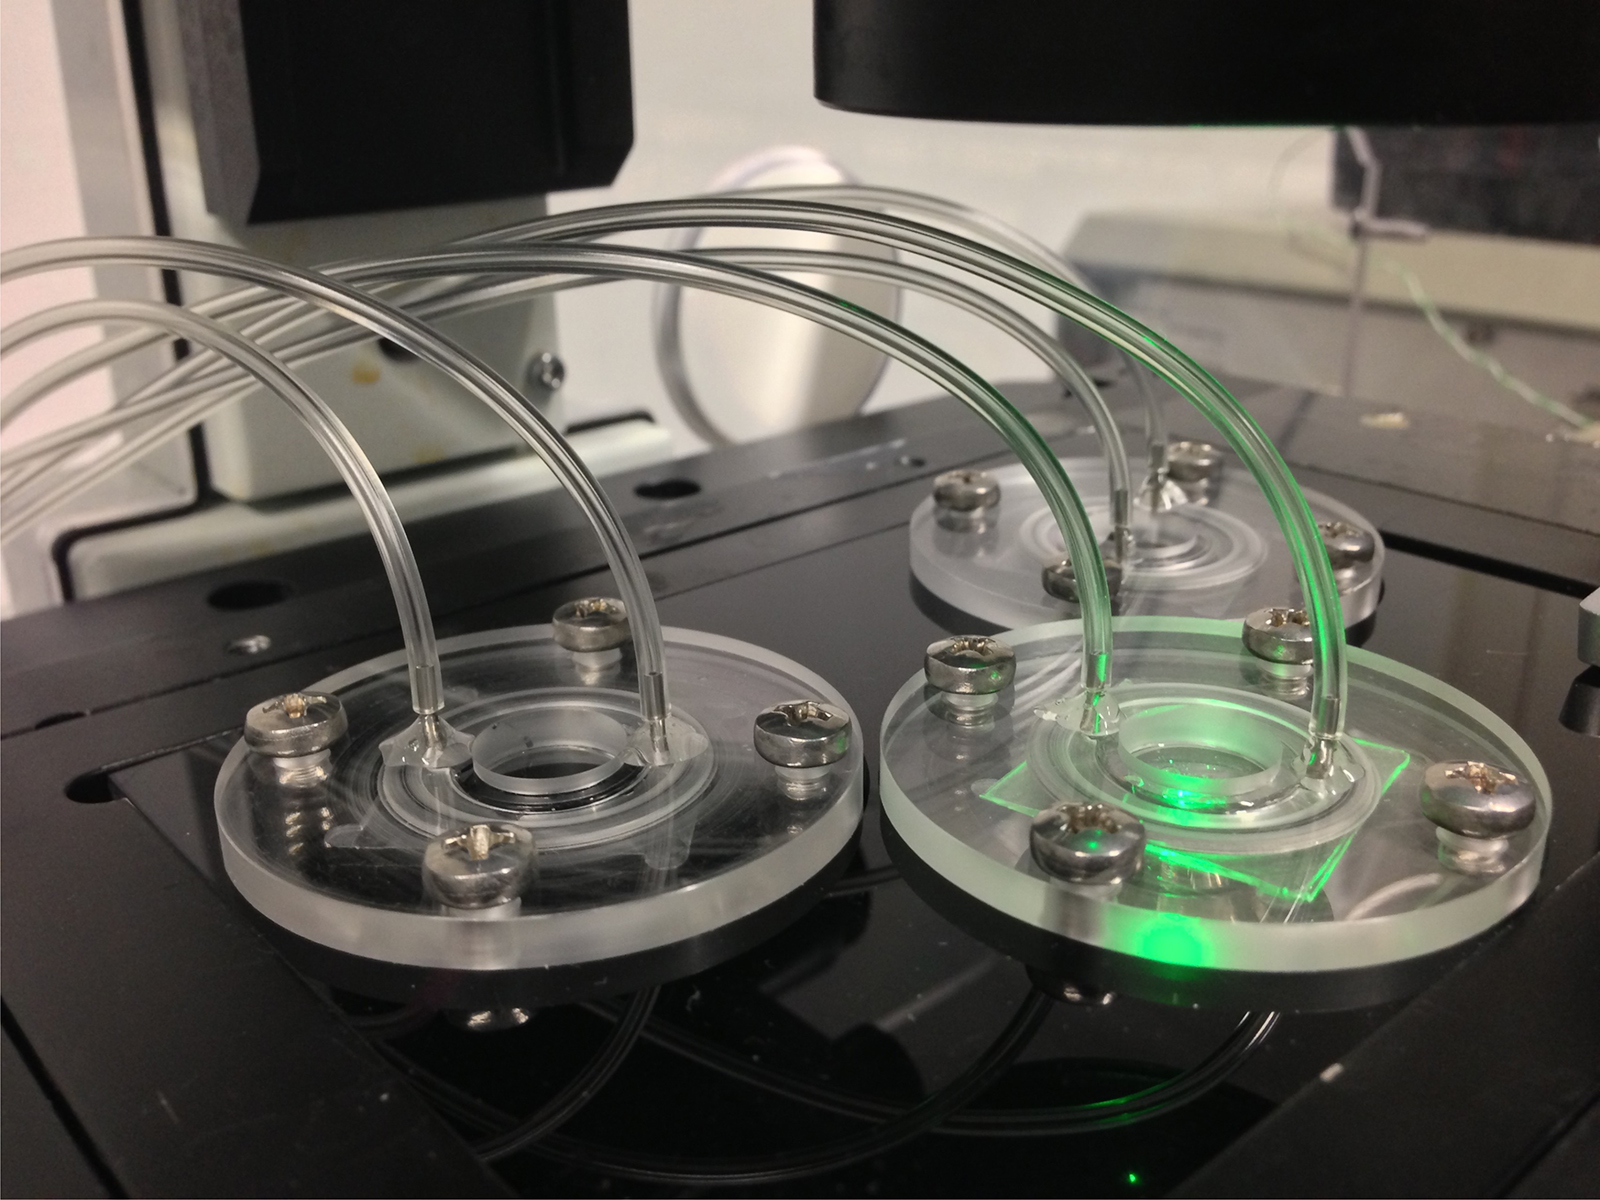 Prototype of the HeMiBio bioreactor for the long-term culture of liver cells.